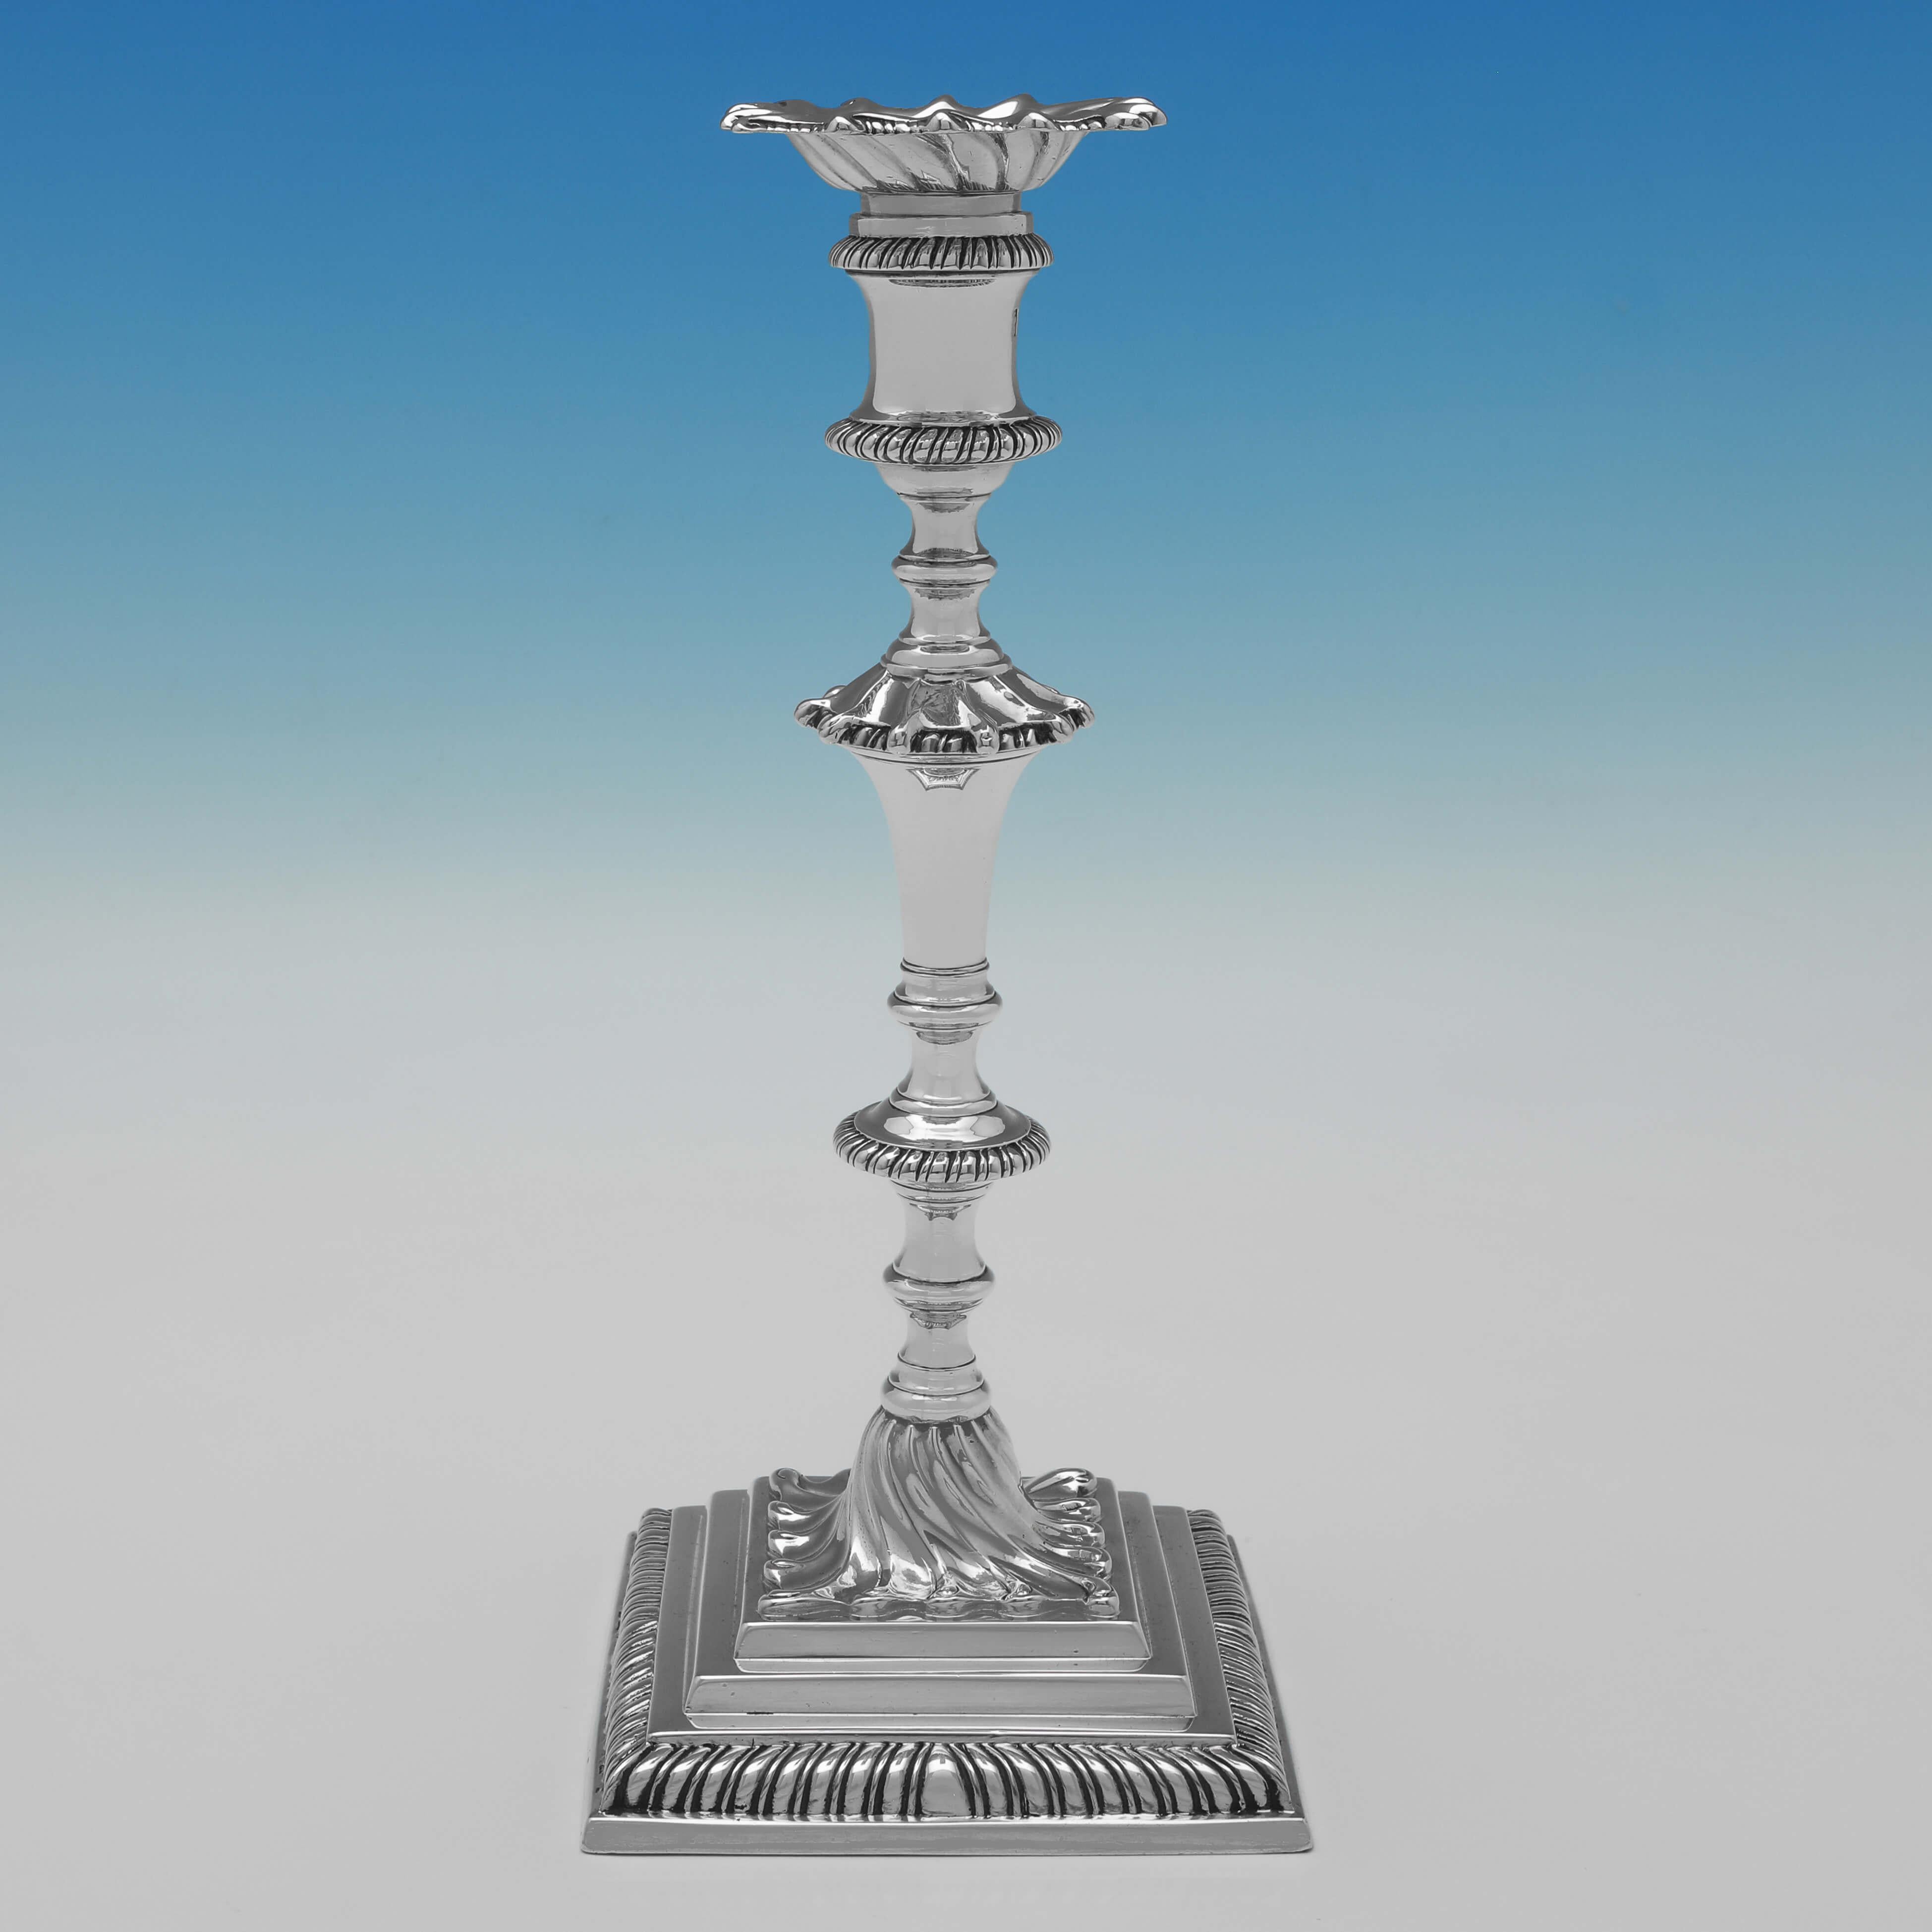 Hallmarked in London in 1763 by Elizabeth Cooke, this attractive pair of cast, George III period, Antique Sterling Silver Candlesticks stand on stepped bases, featuring gadroon borders, and engraved underneath with 'Robert Galland - Sans Tache